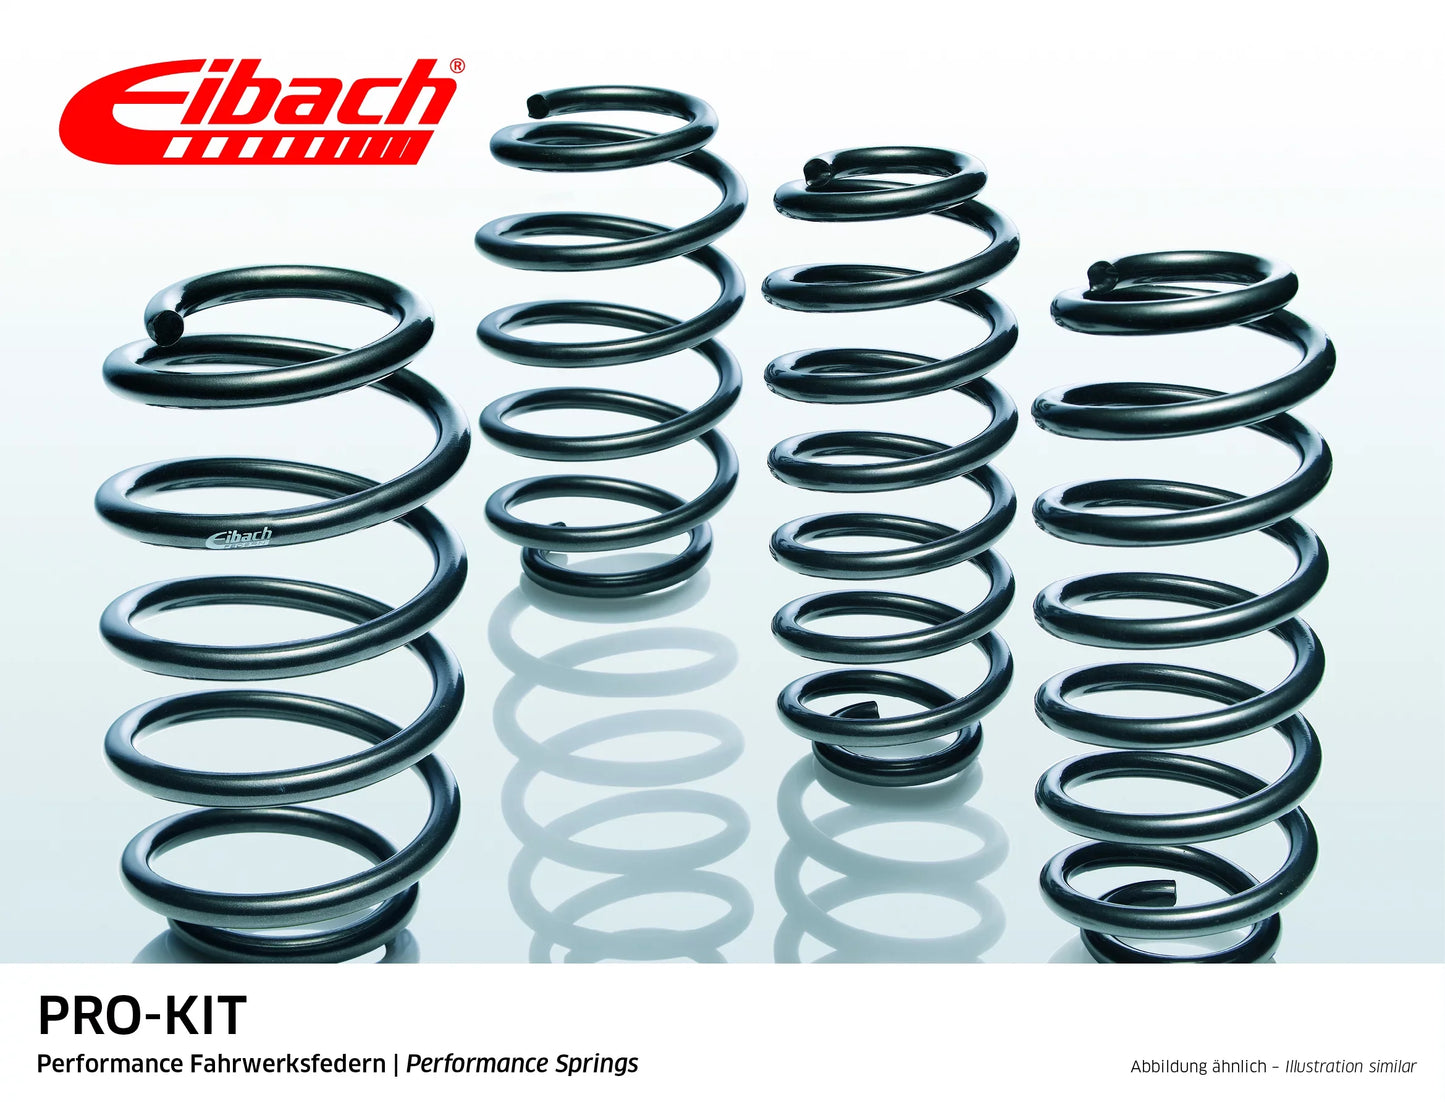 Eibach Pro-Kit Lowering Springs (E10-15-008-04-22) at £315.99